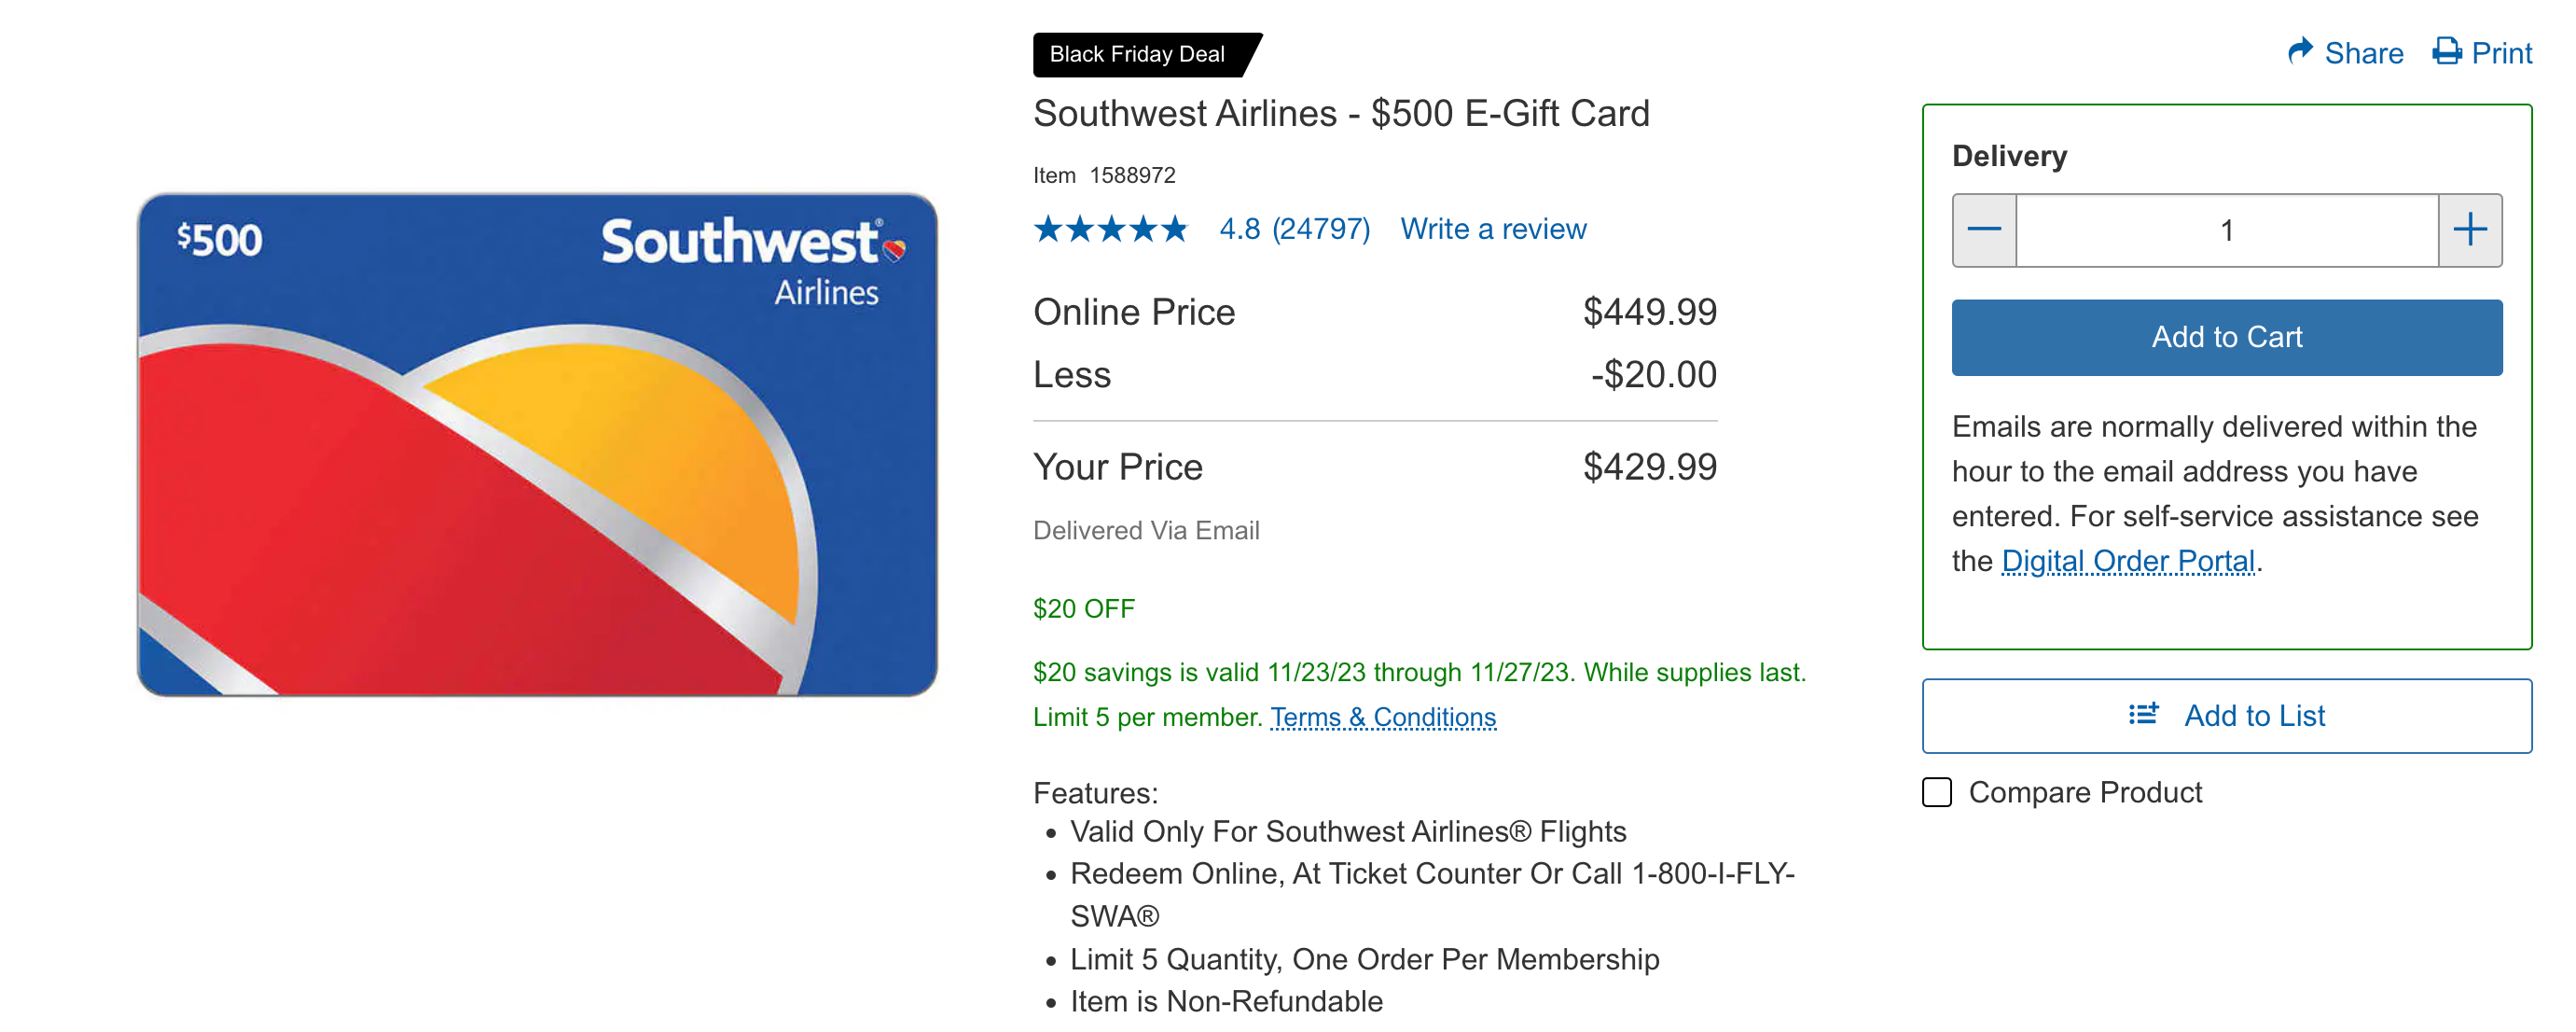 Costco landing page for Southwest Airlines gift cards.